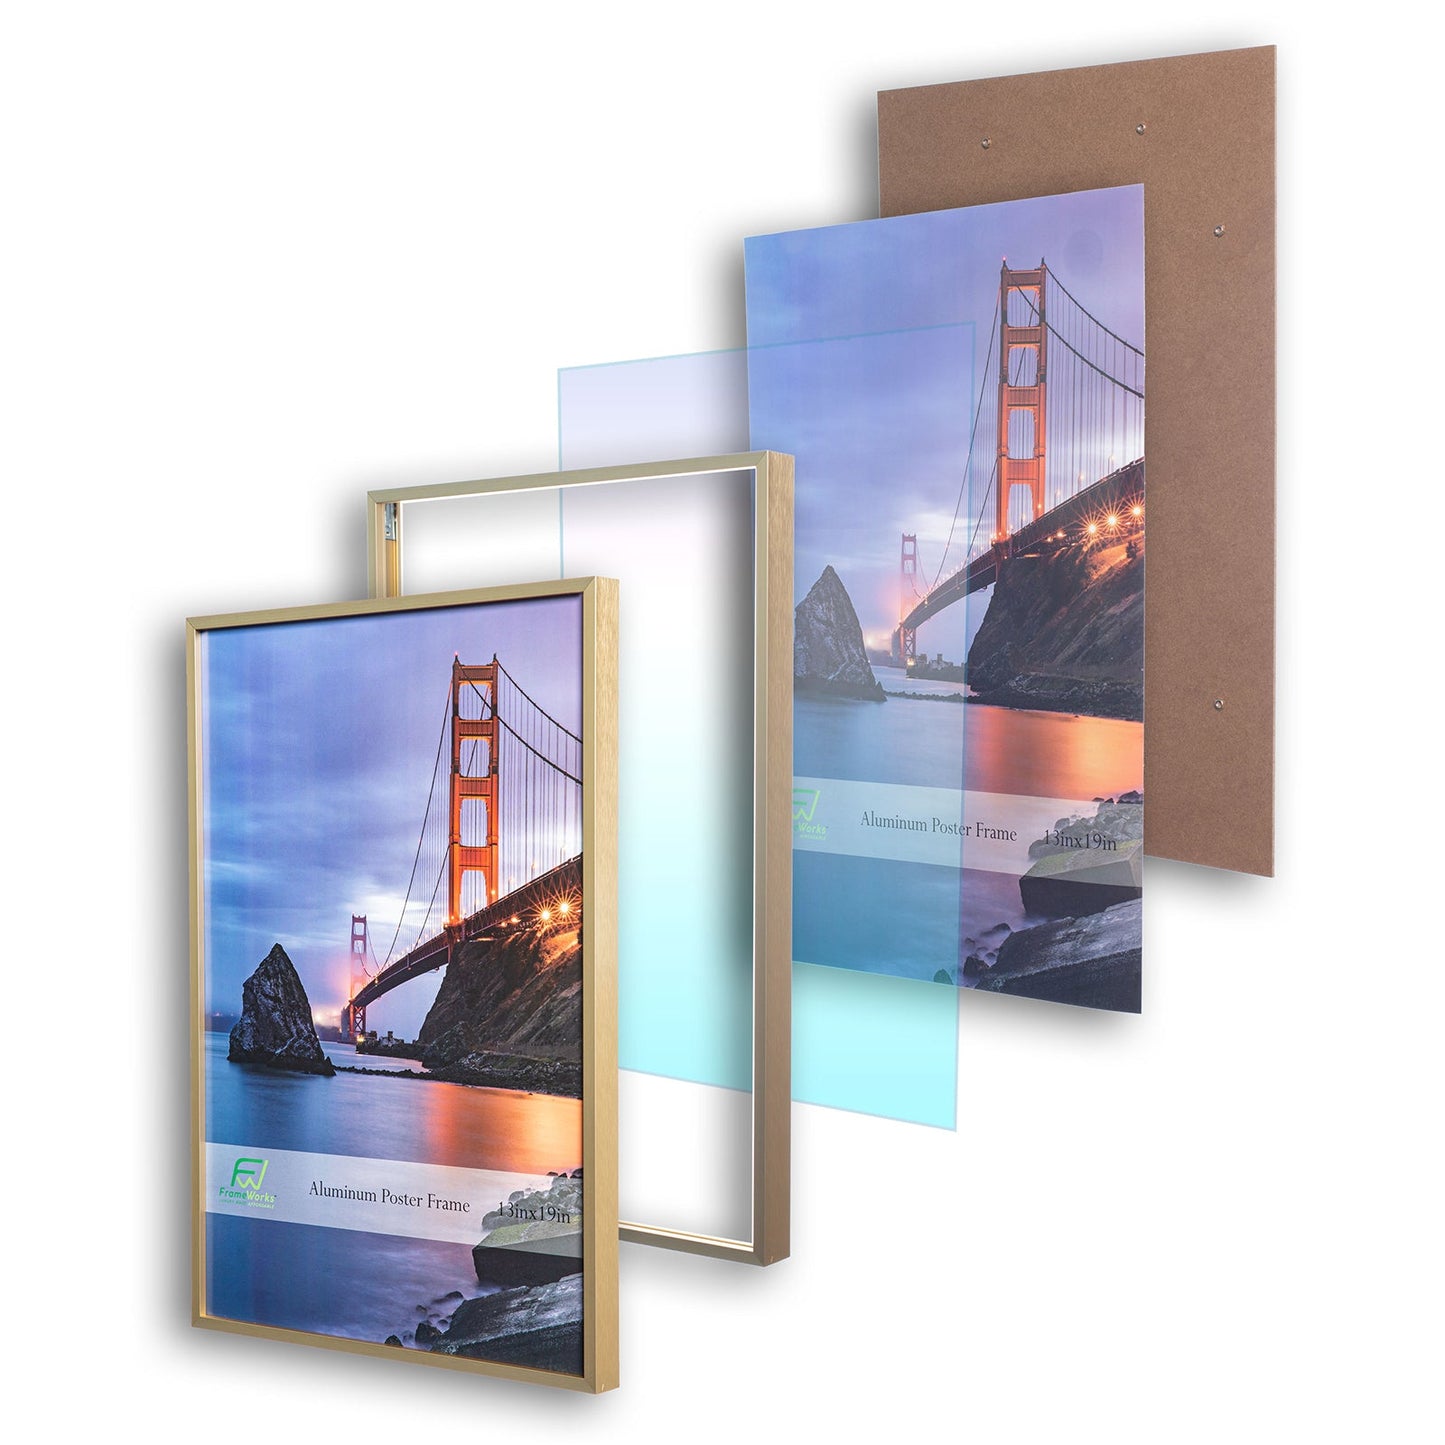 13" x 19" Gold Brushed Aluminum Poster Picture Frame with Plexiglass